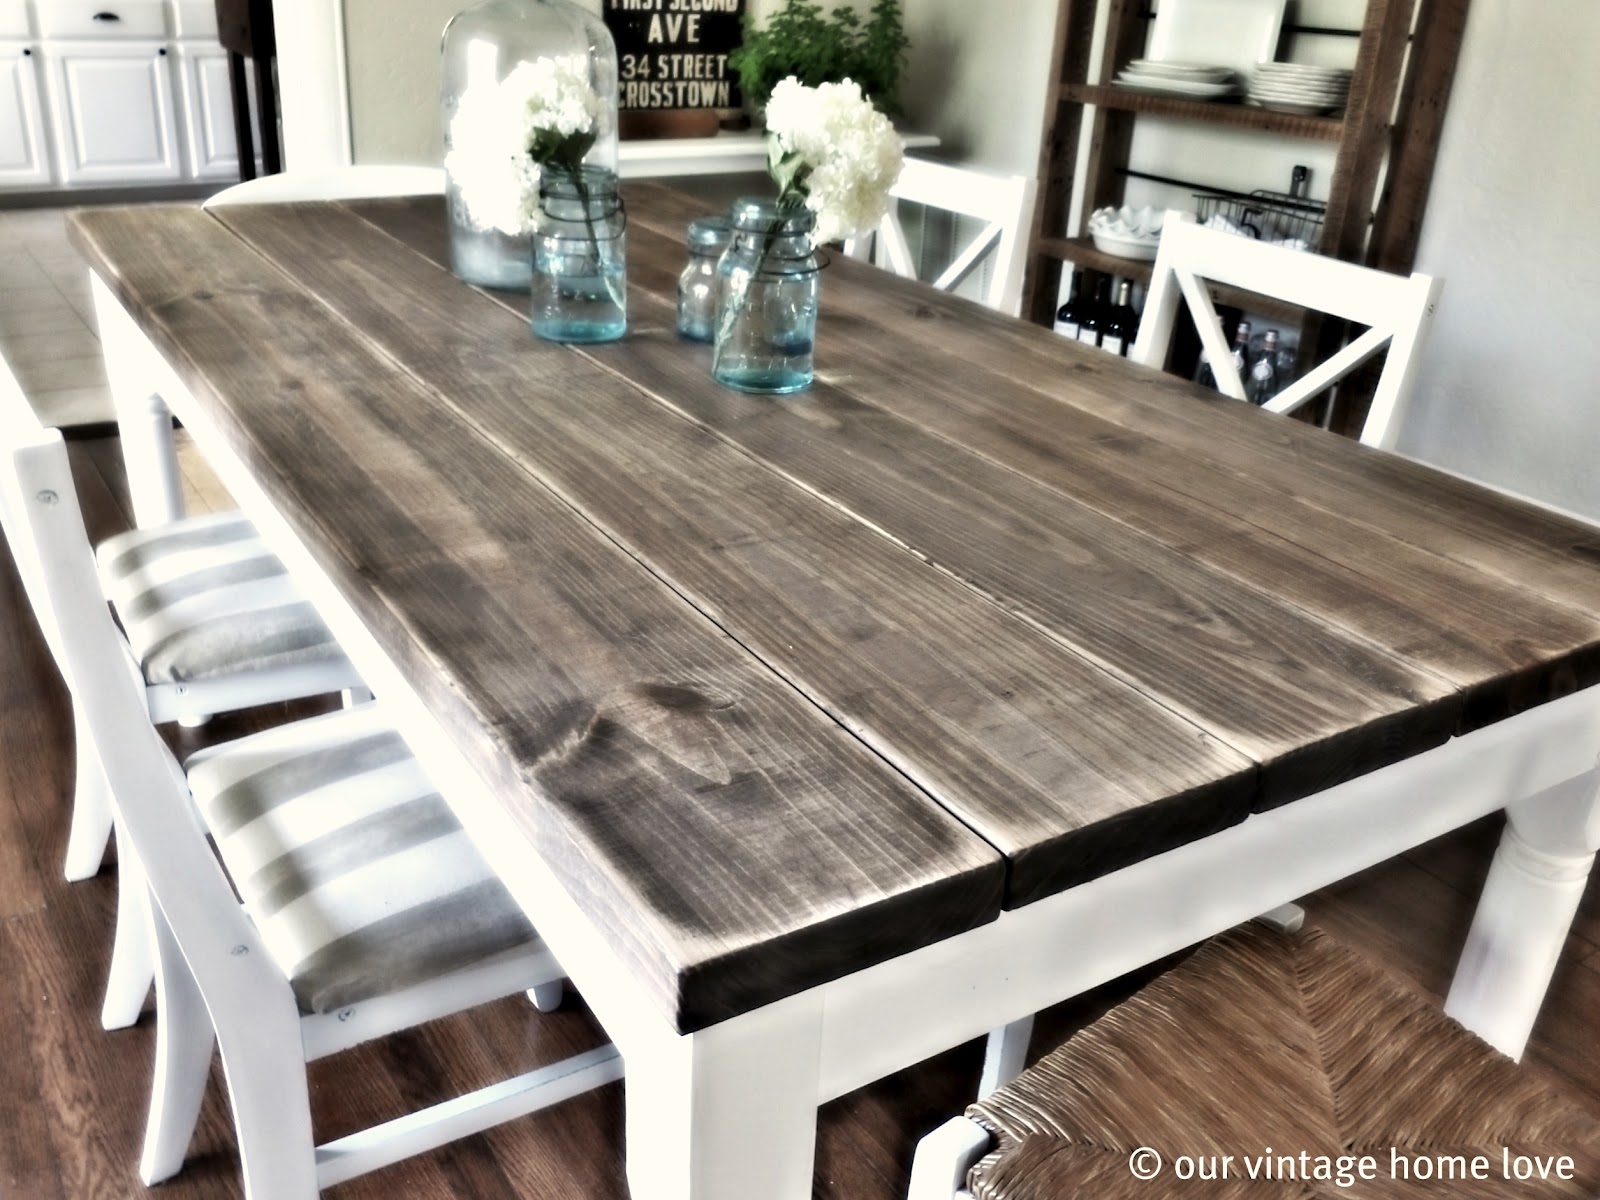 our vintage home love: Dining Room Table